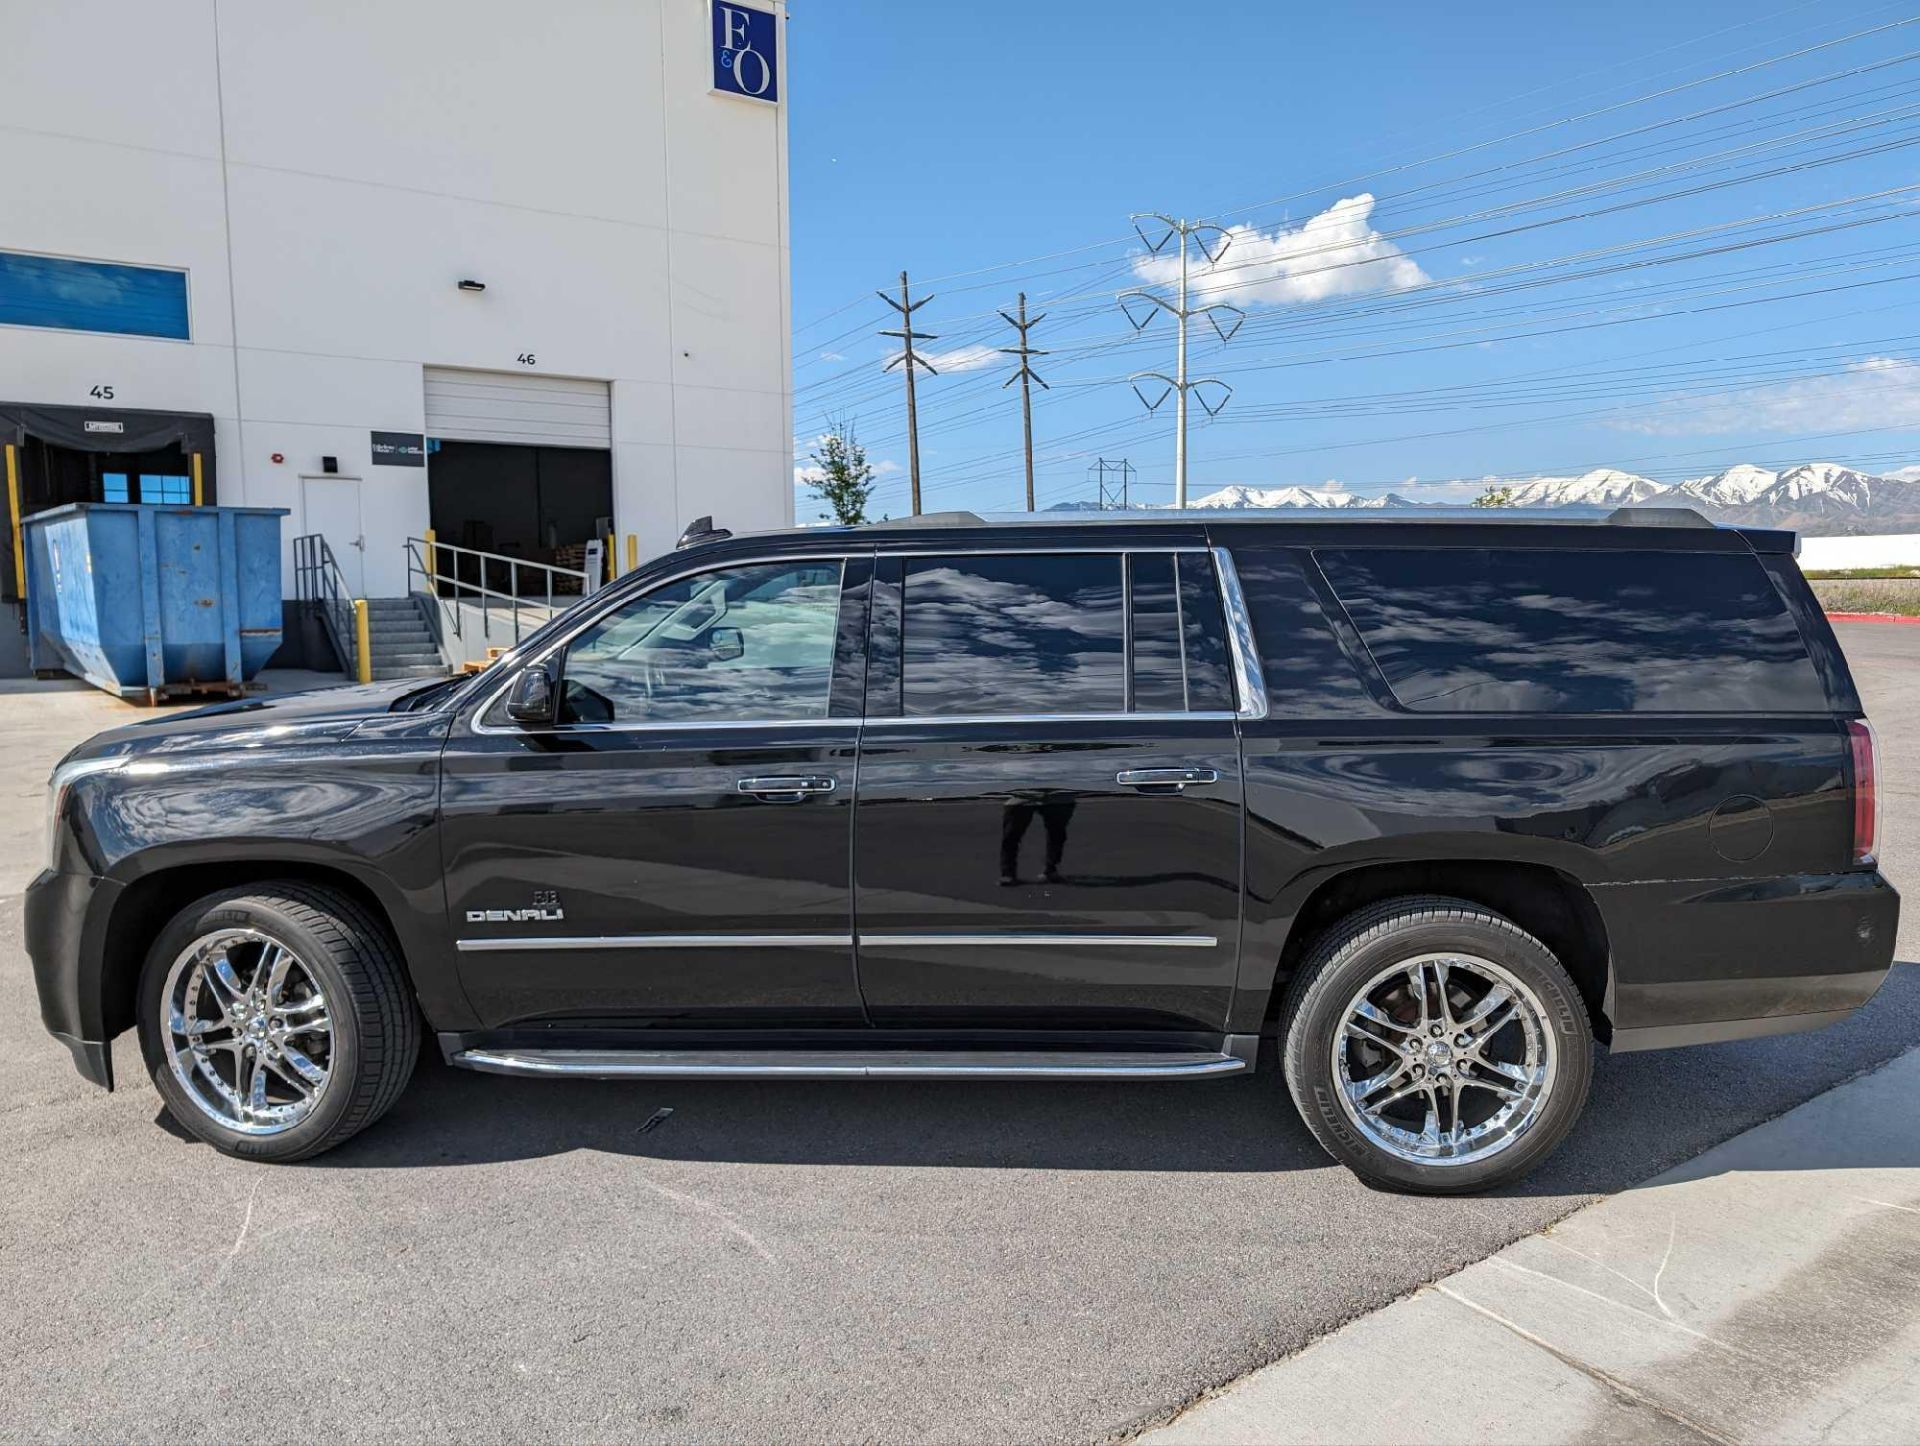 2017 GMC Yukon XL Denali w/ 111K Miles, 4wd, v8 VIN #: 1GKS2HKJ4HR323051 Features & notes: runs and - Image 8 of 16